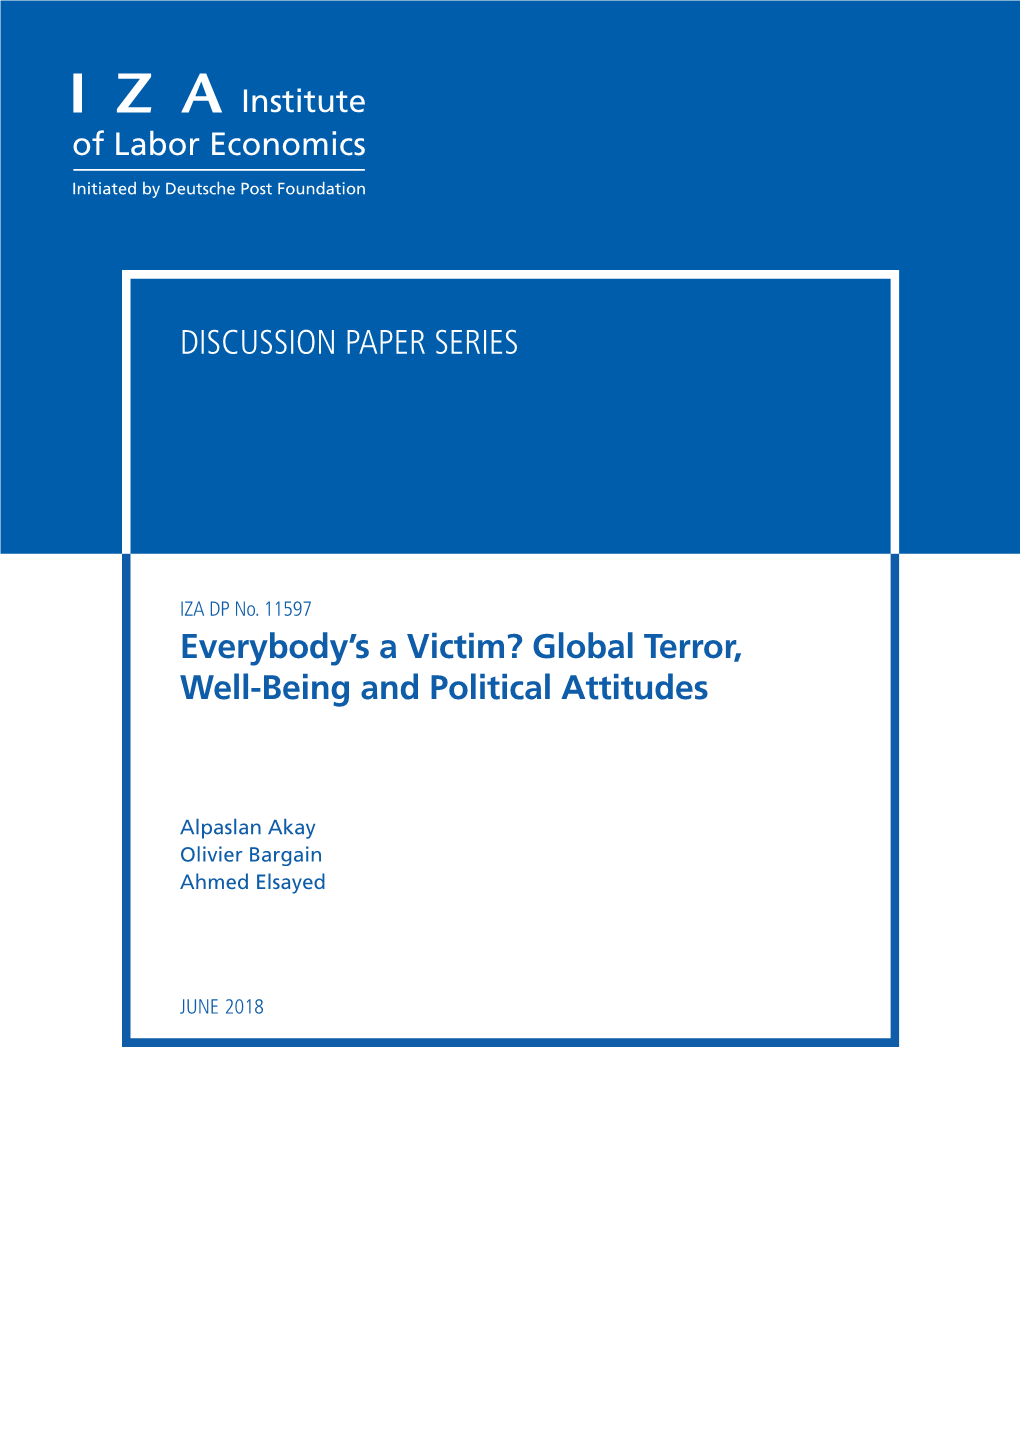 Global Terror, Well-Being and Political Attitudes